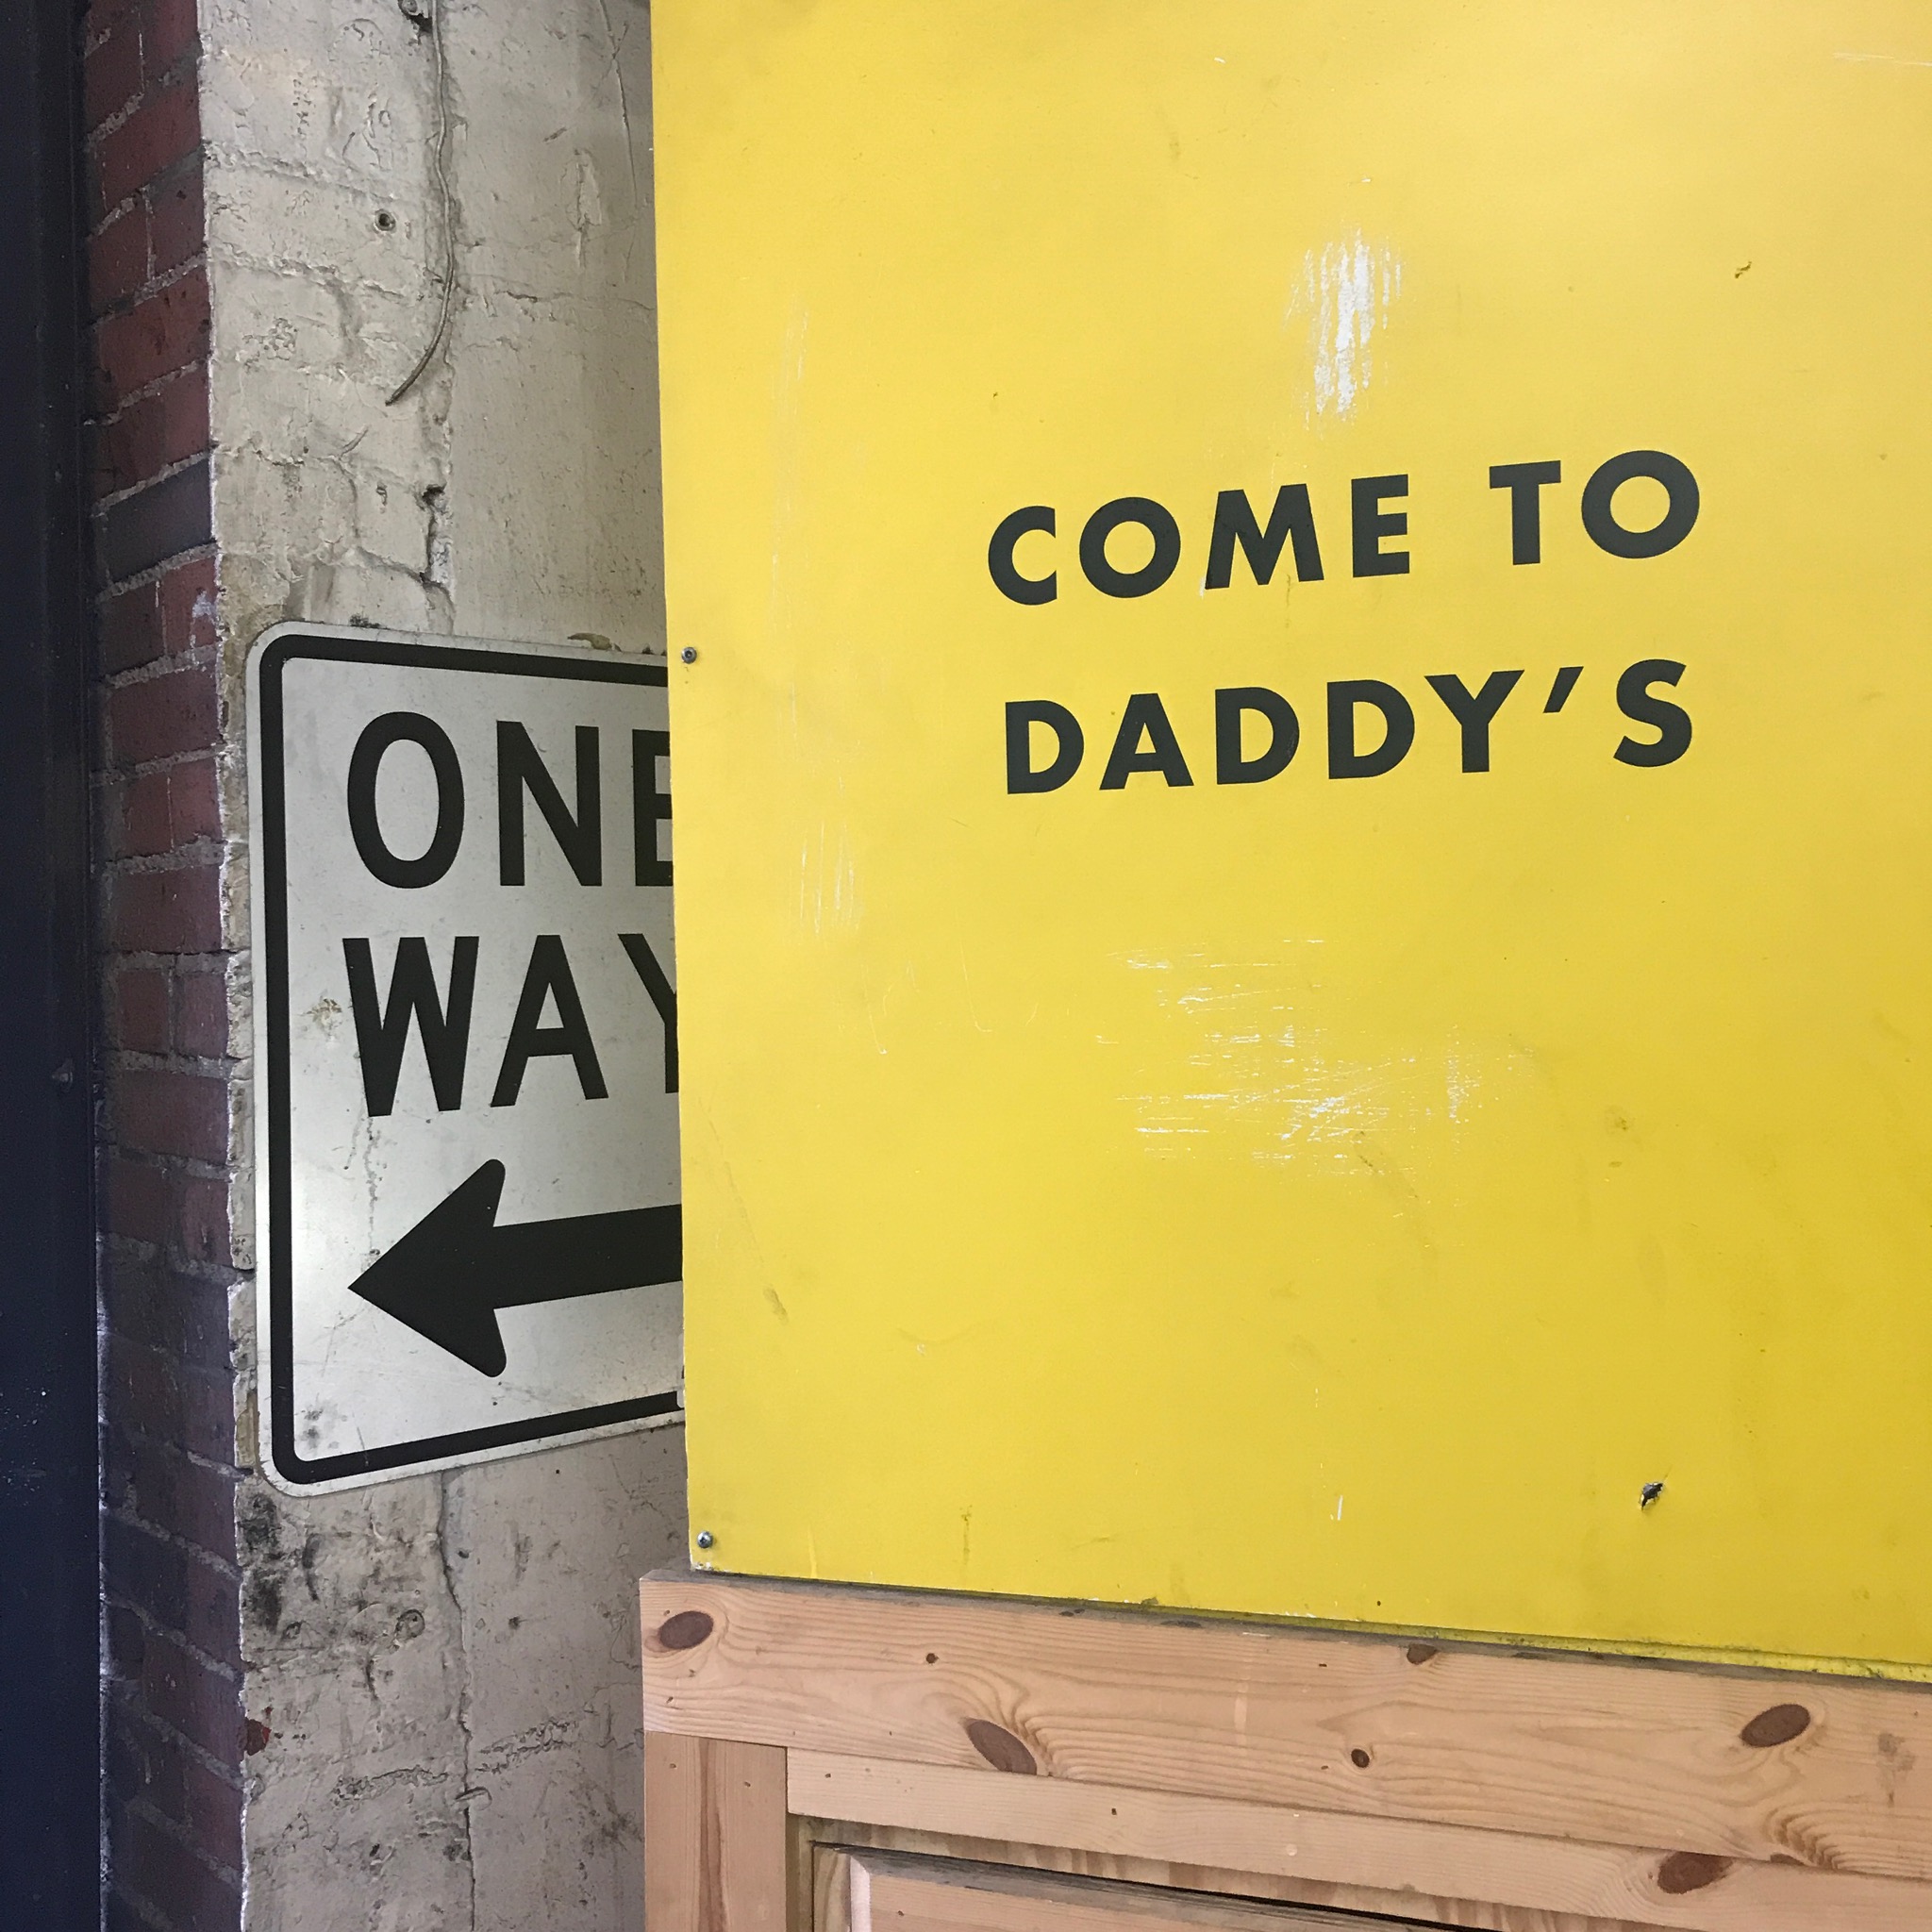 Come to daddy's